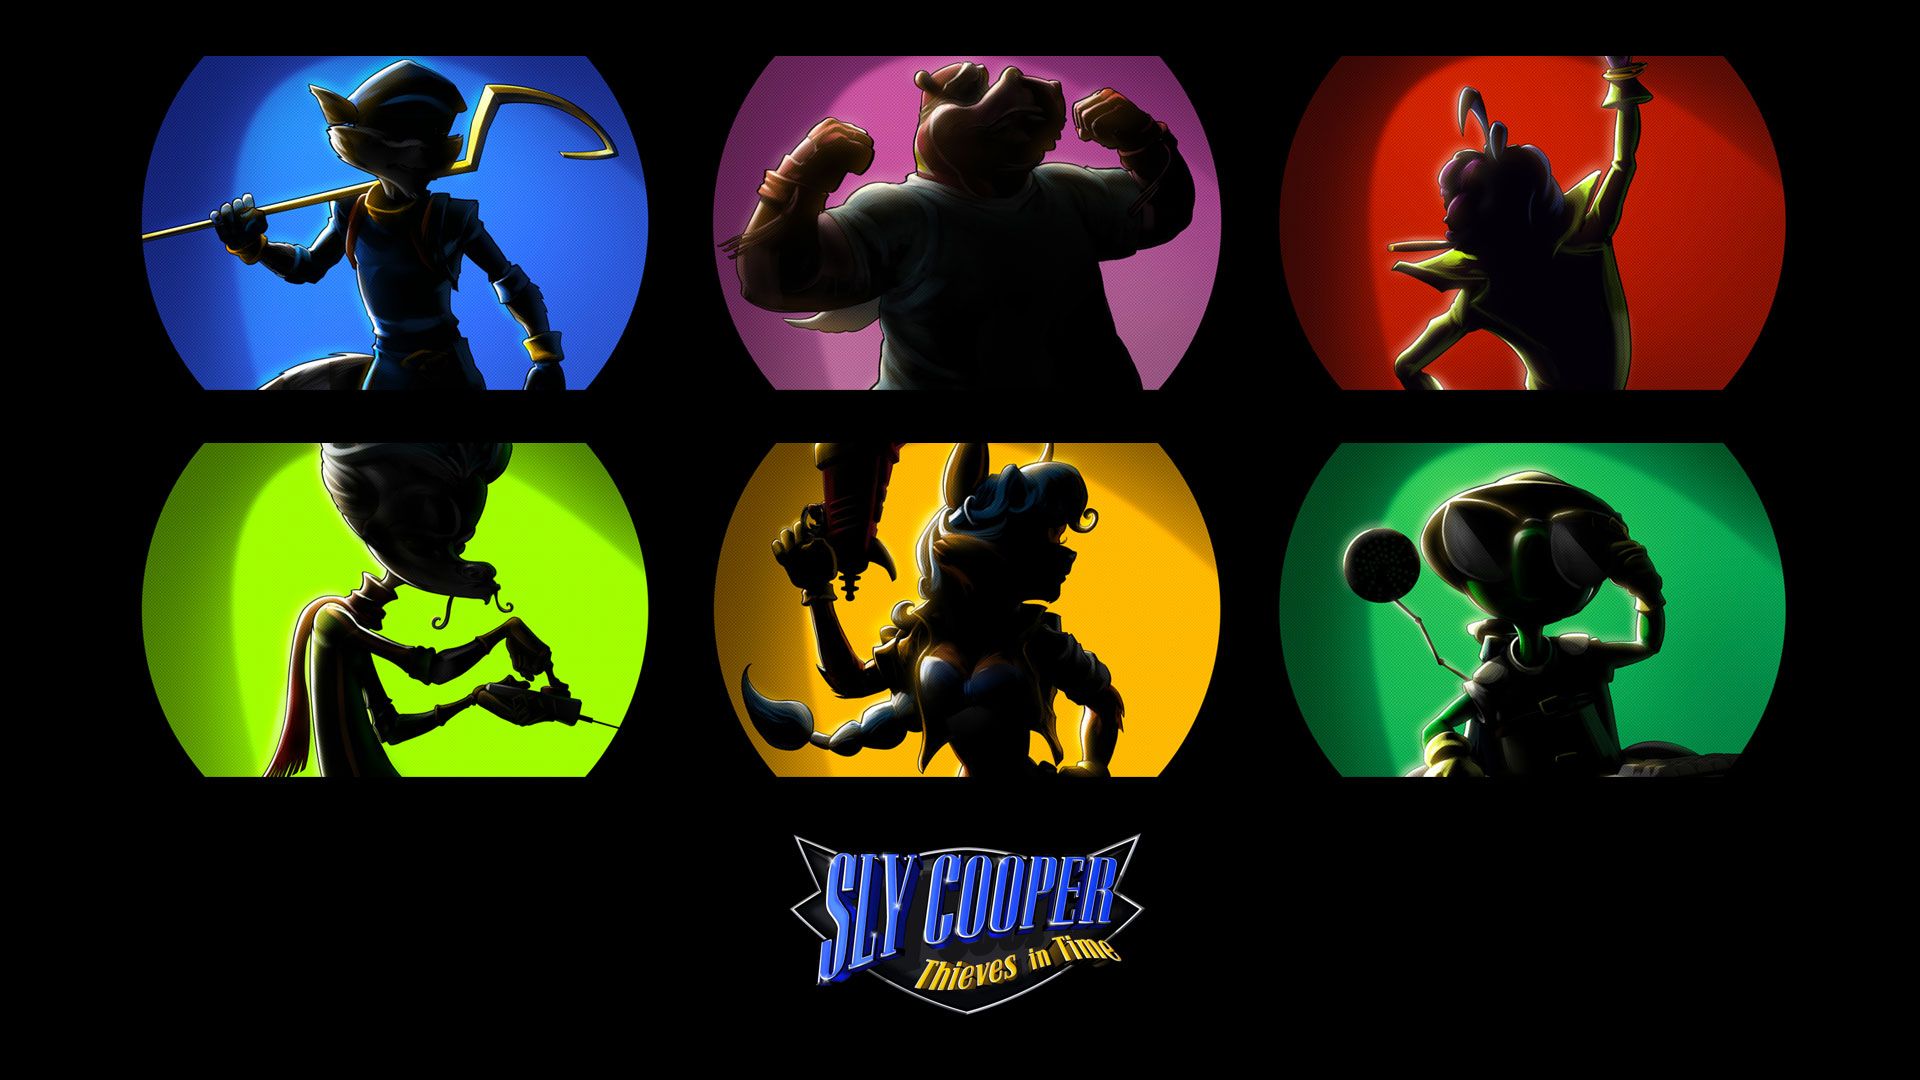 Sly Cooper: Thieves In Time Backgrounds, Compatible - PC, Mobile, Gadgets| 1920x1080 px